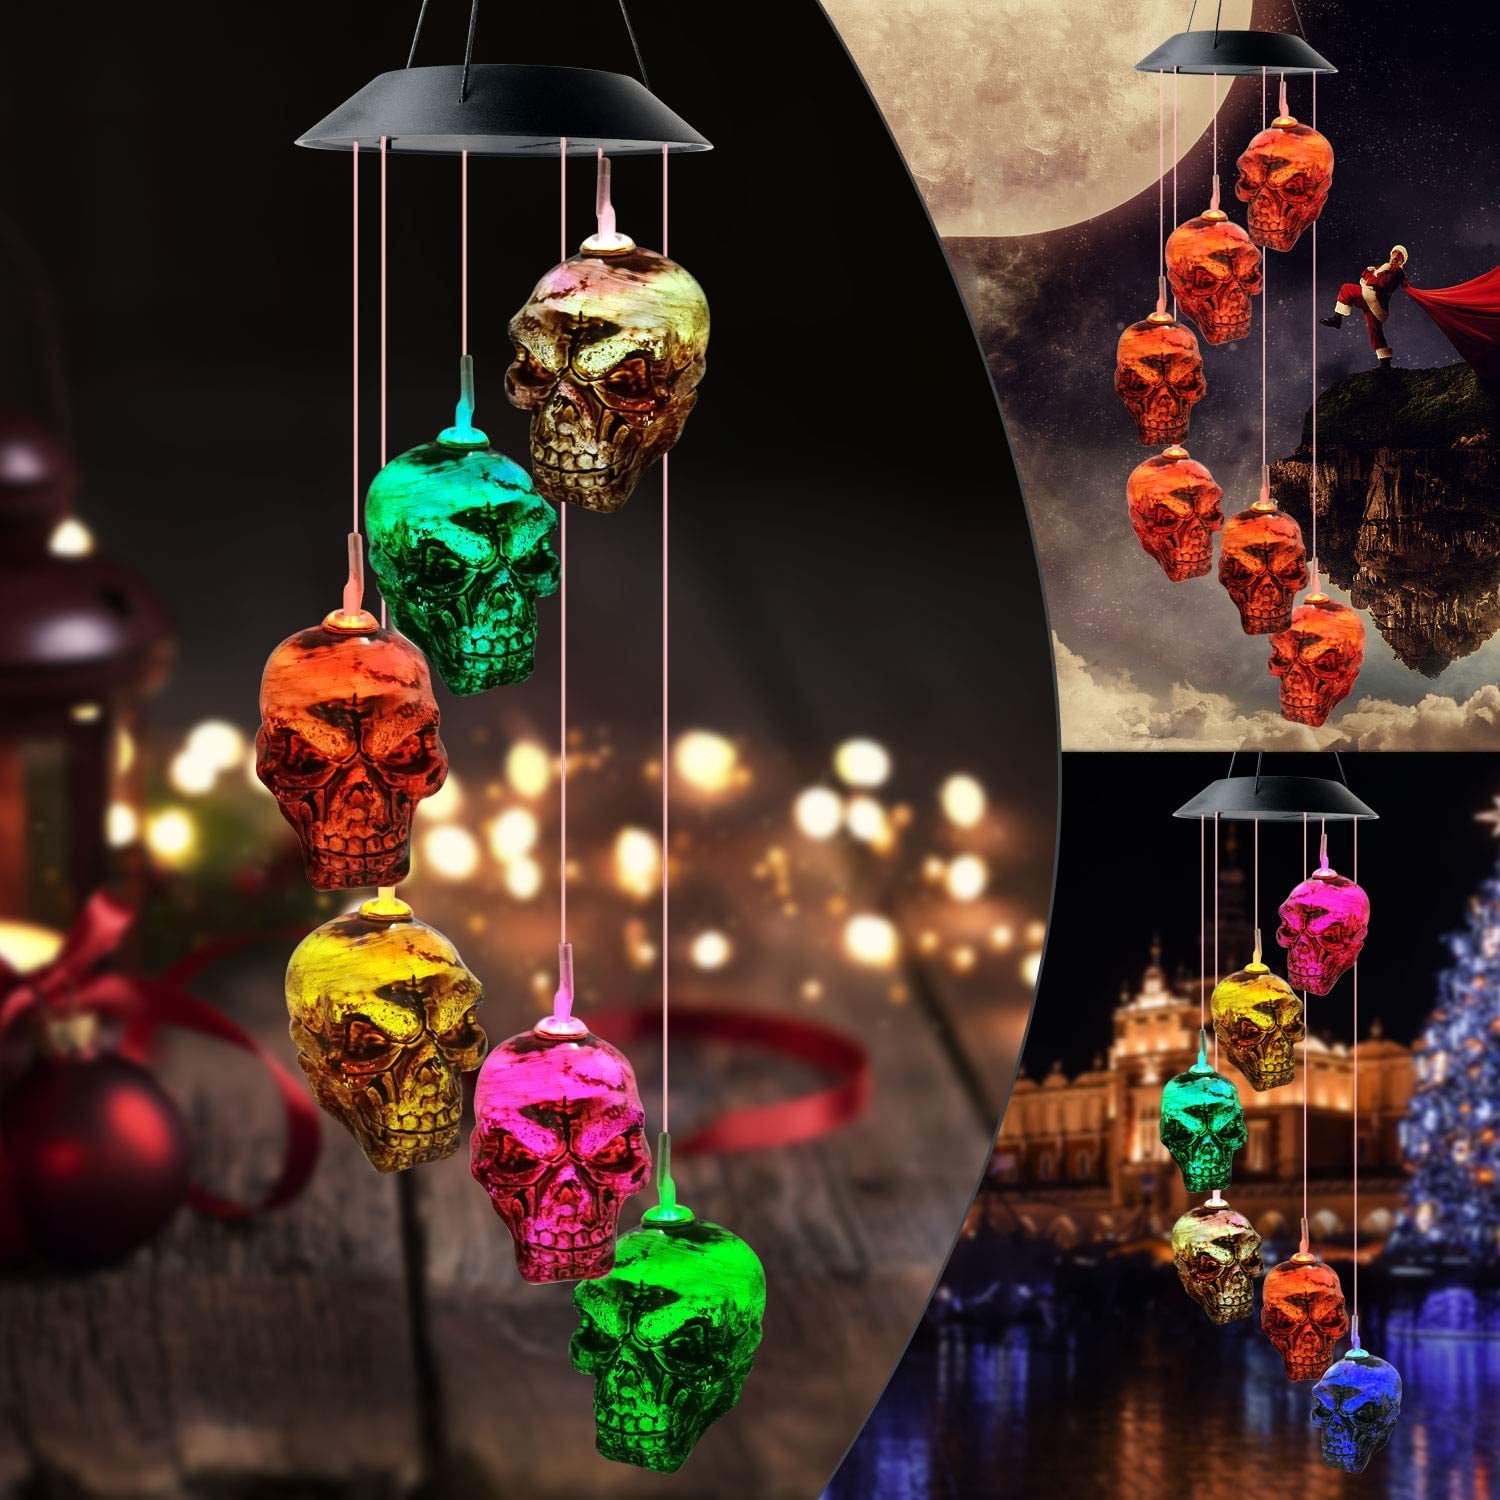 Interesting Gifts Garden Decor Skeleton Skull Solar Wind Chime Gifts for Friends Unique Gifts Waterproof Holiday Lights Garden Decoration Festival Decoration.